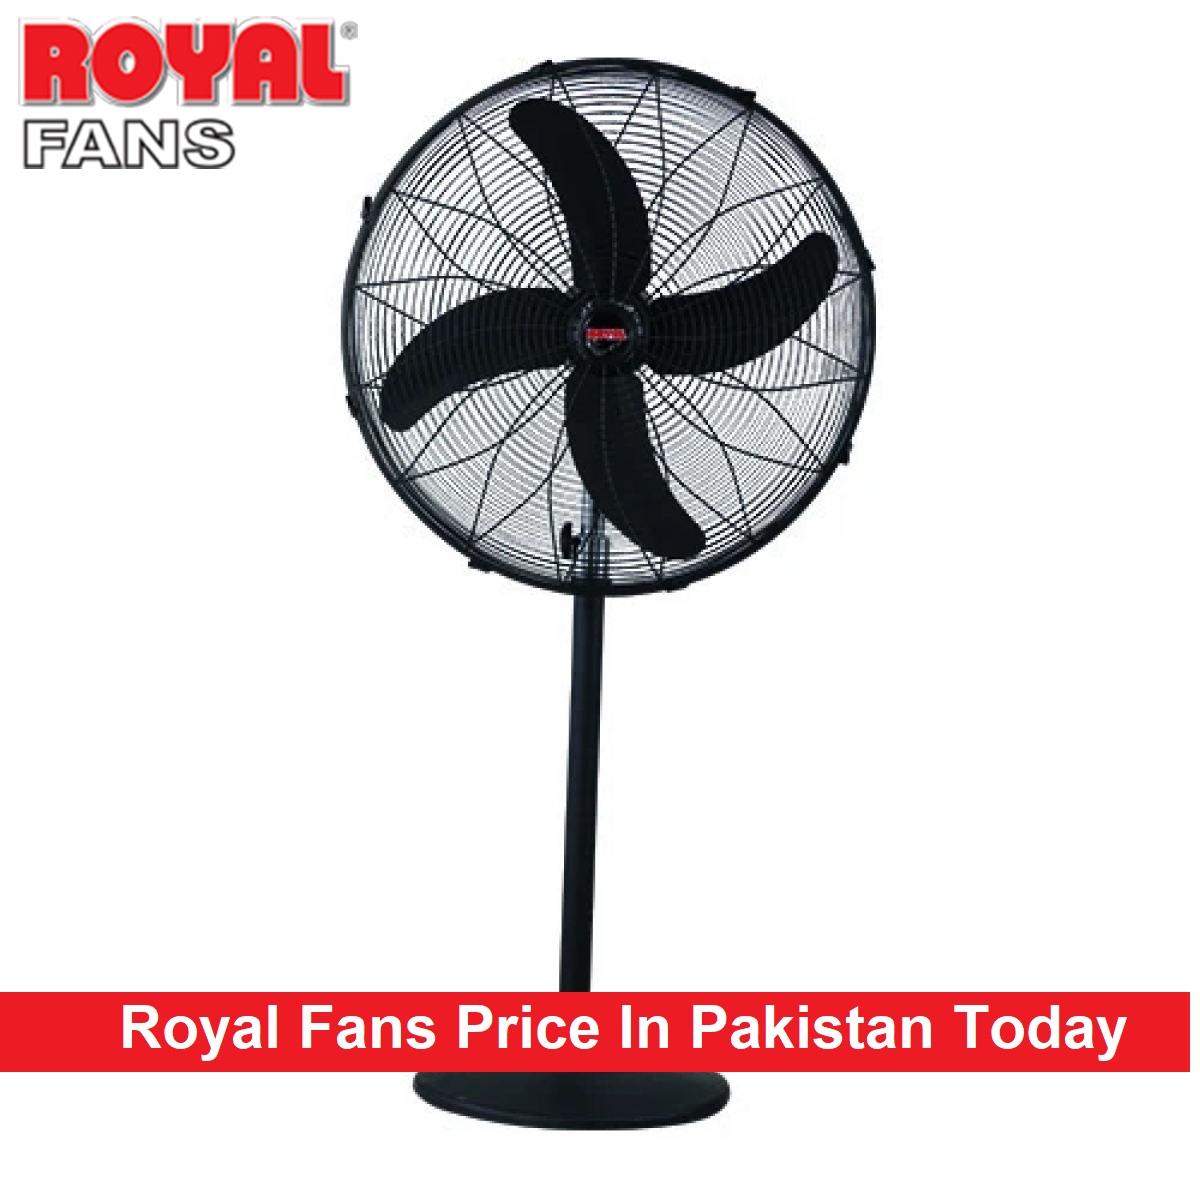 Royal Fans Price In Pakistan Today